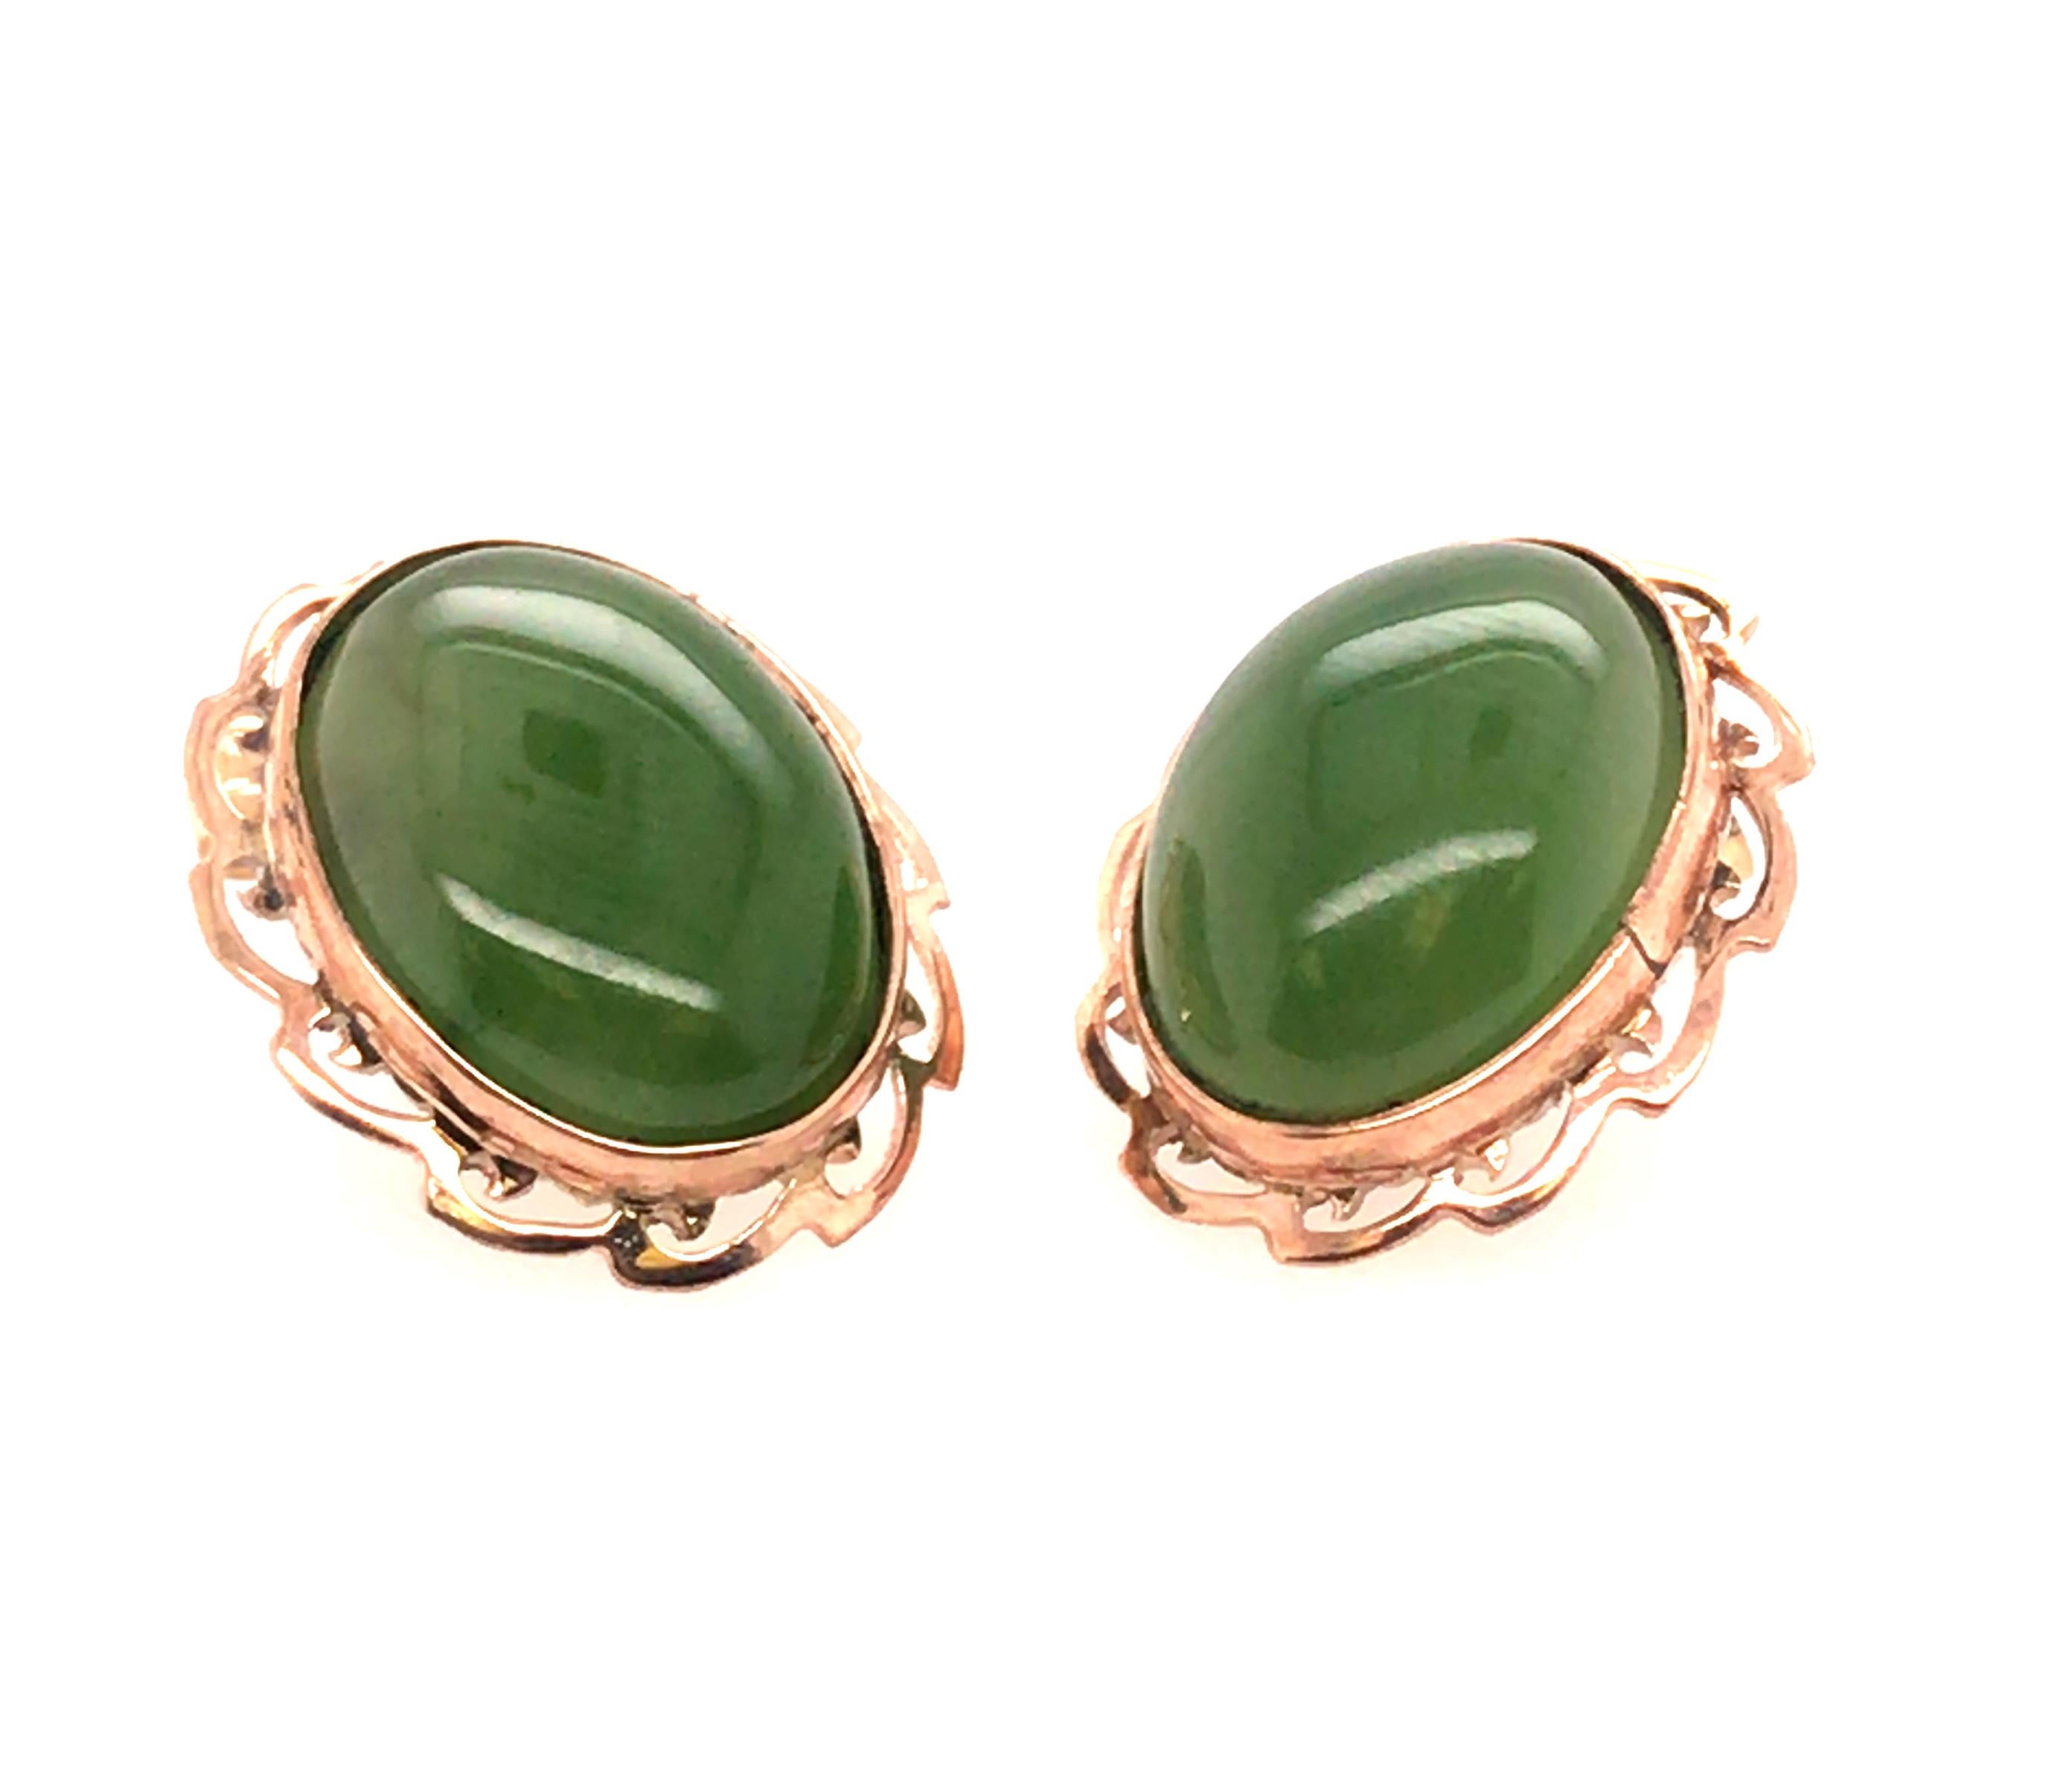 Antique Vintage Retro Mid Century Jade 14K Yellow Gold Earrings



Featuring 2 Beautiful Natural 16 x 13.5mm Oval Cabochon Translucent Jade Gemstones

100% Natural Gemstones  

Solid 14K Yellow Gold

Simple Yet Elegant 

Hand Cut Gold

Circa